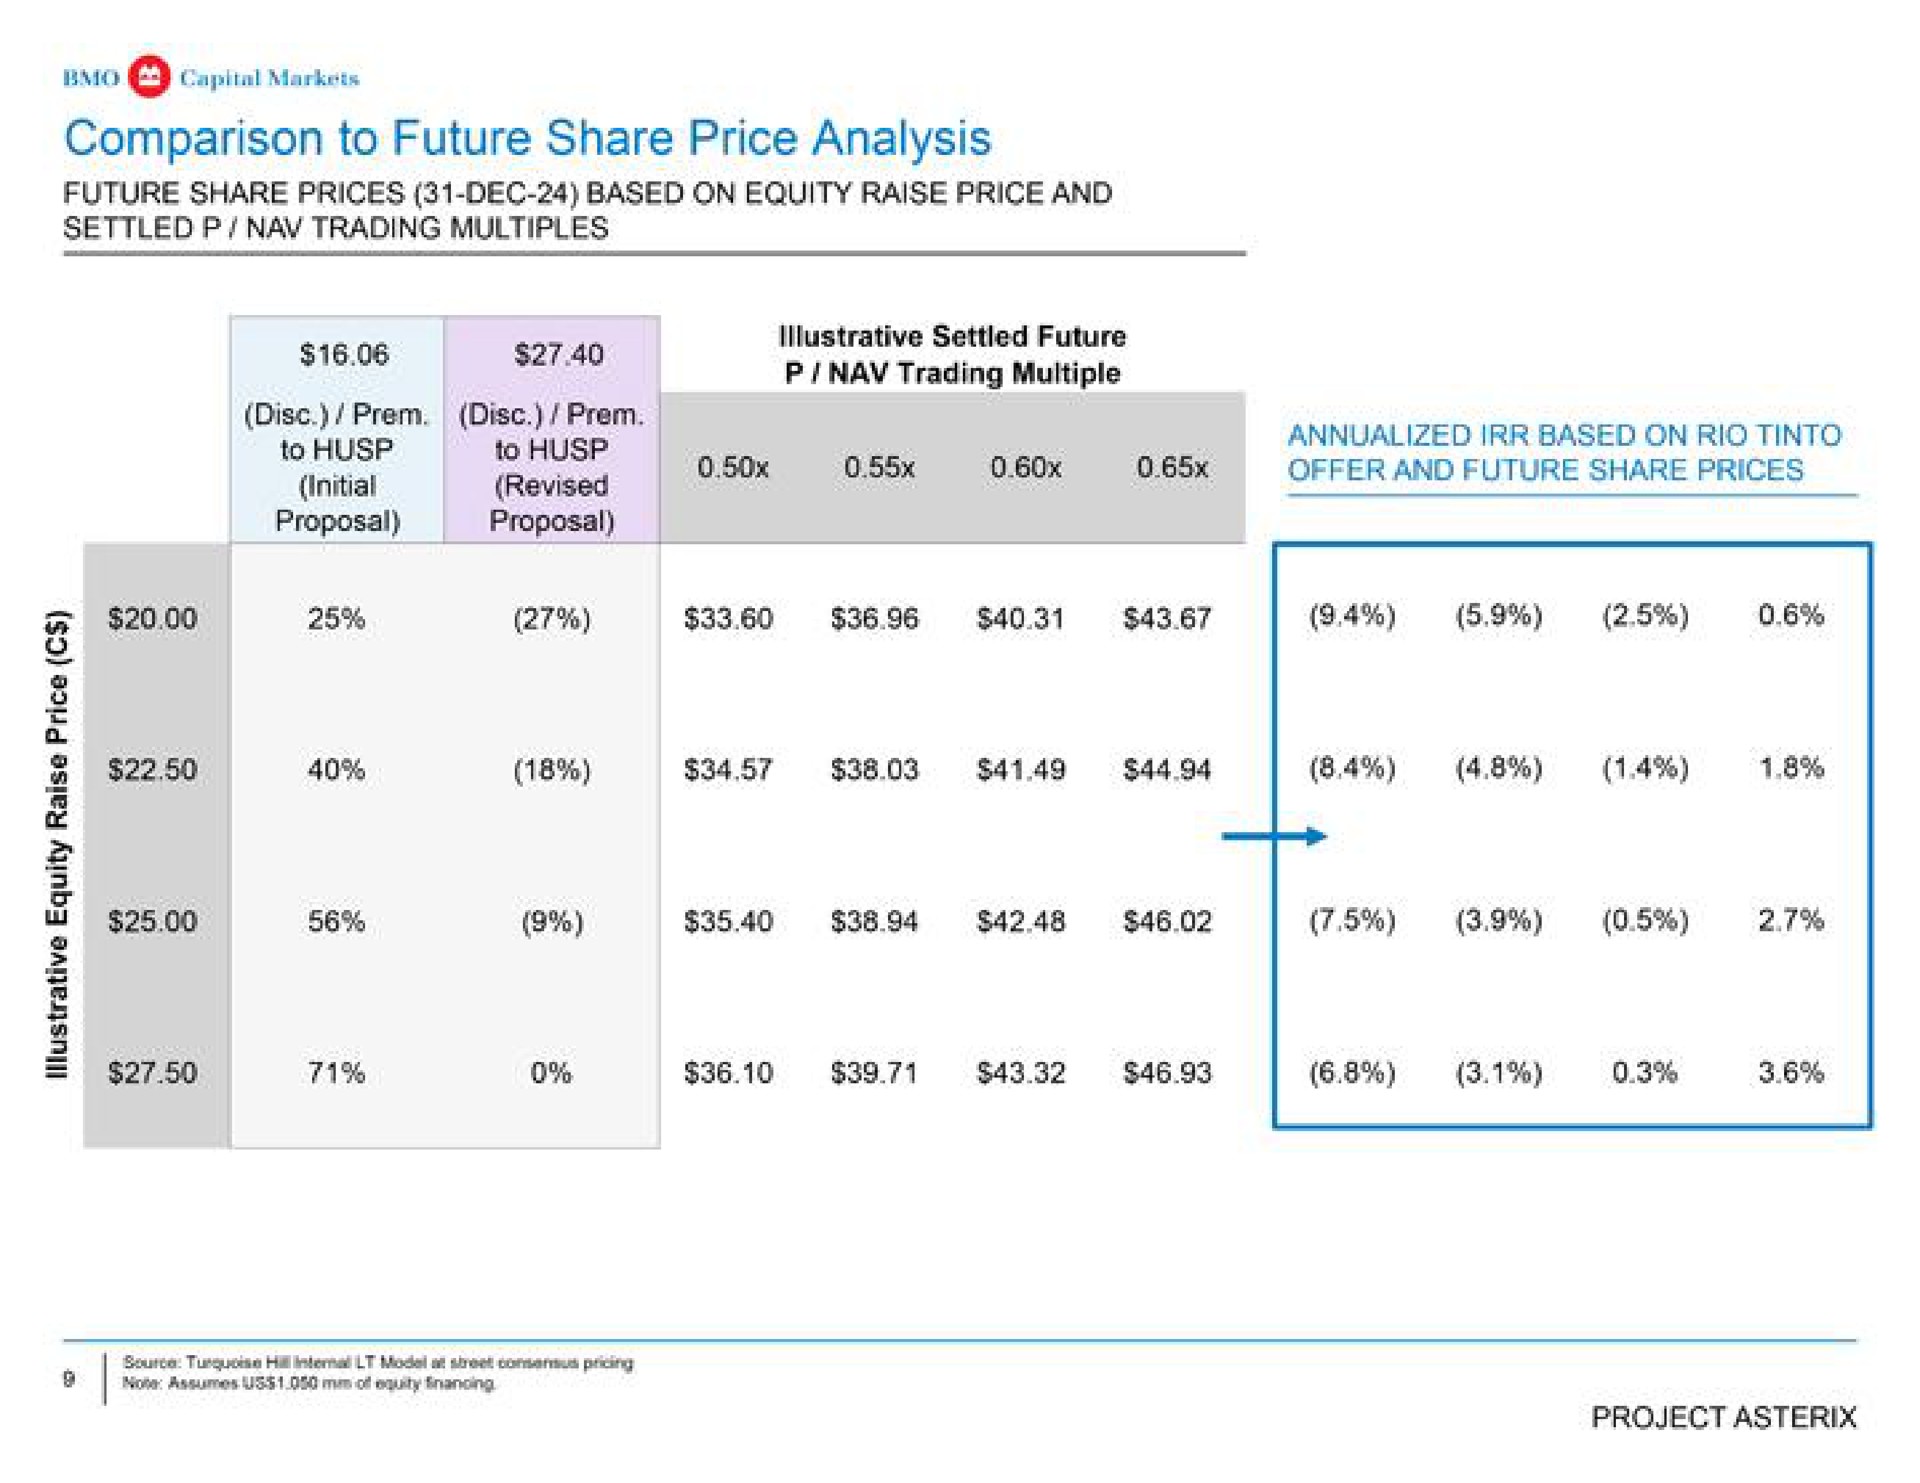 comparison to future share price analysis via trading multiple based on rio offer and future share prices | BMO Capital Markets